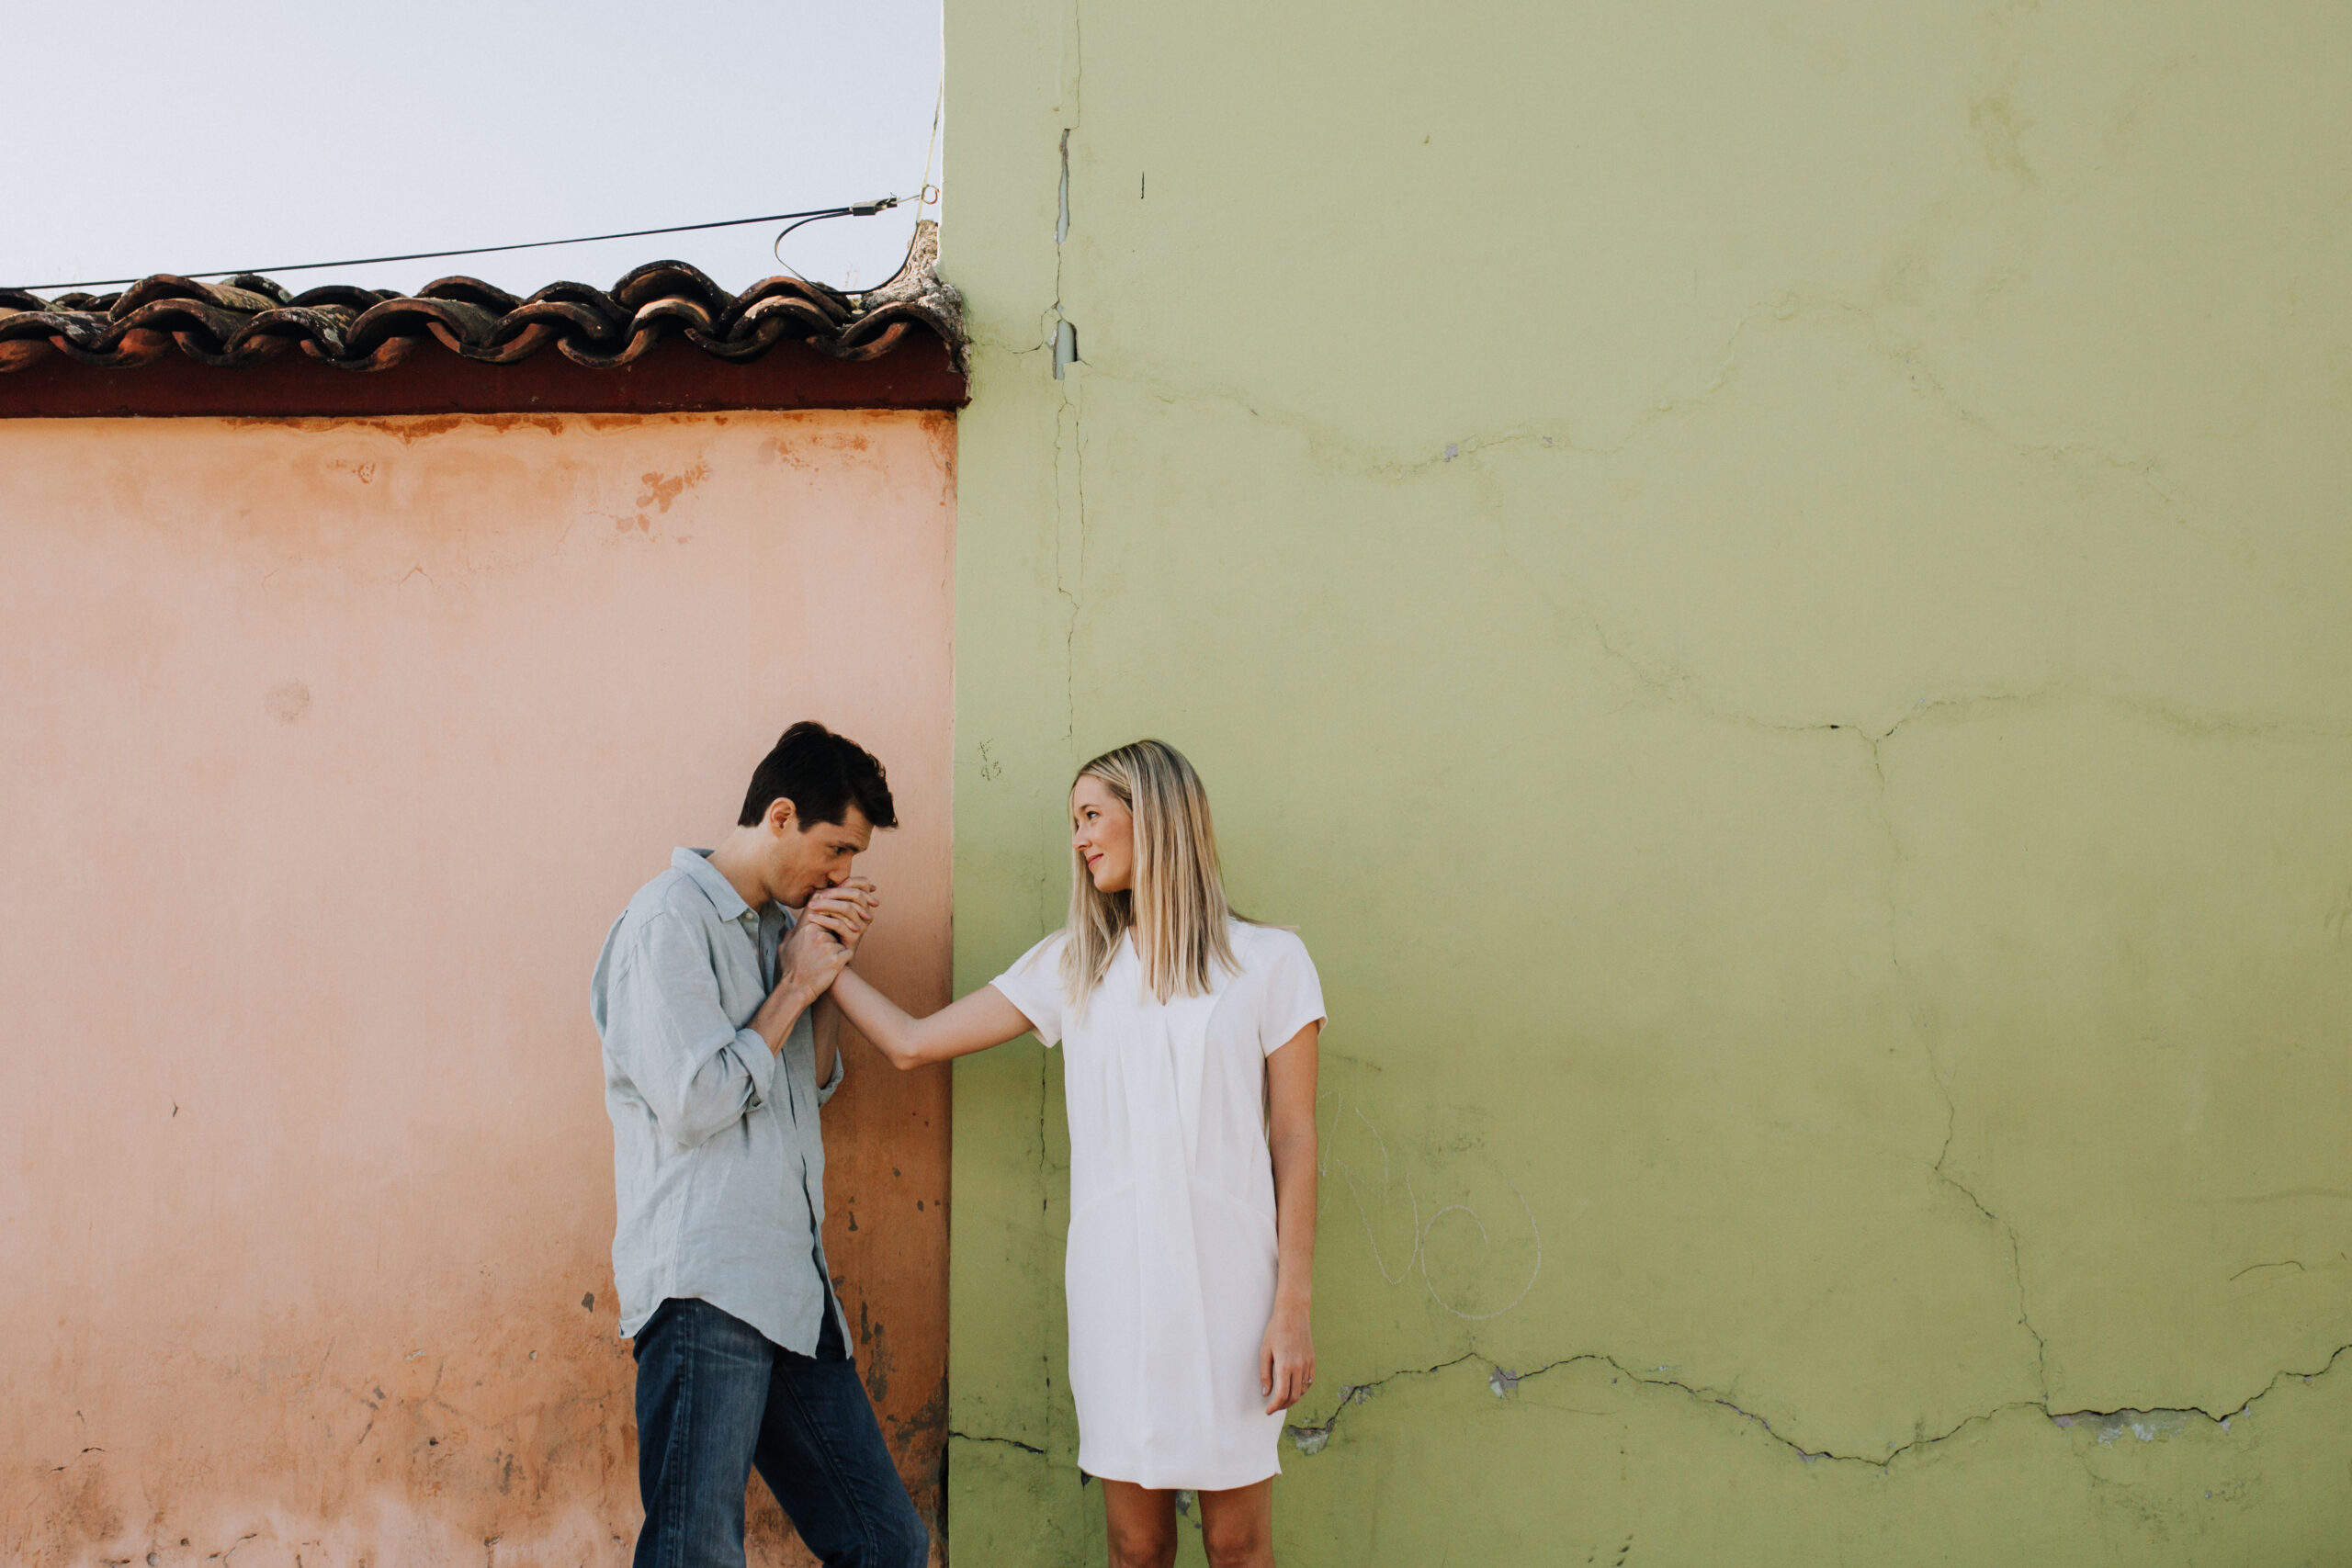 stunning bride and groom pose against a green and orange wall during their dreamy Oaxaca engagement photoshoot